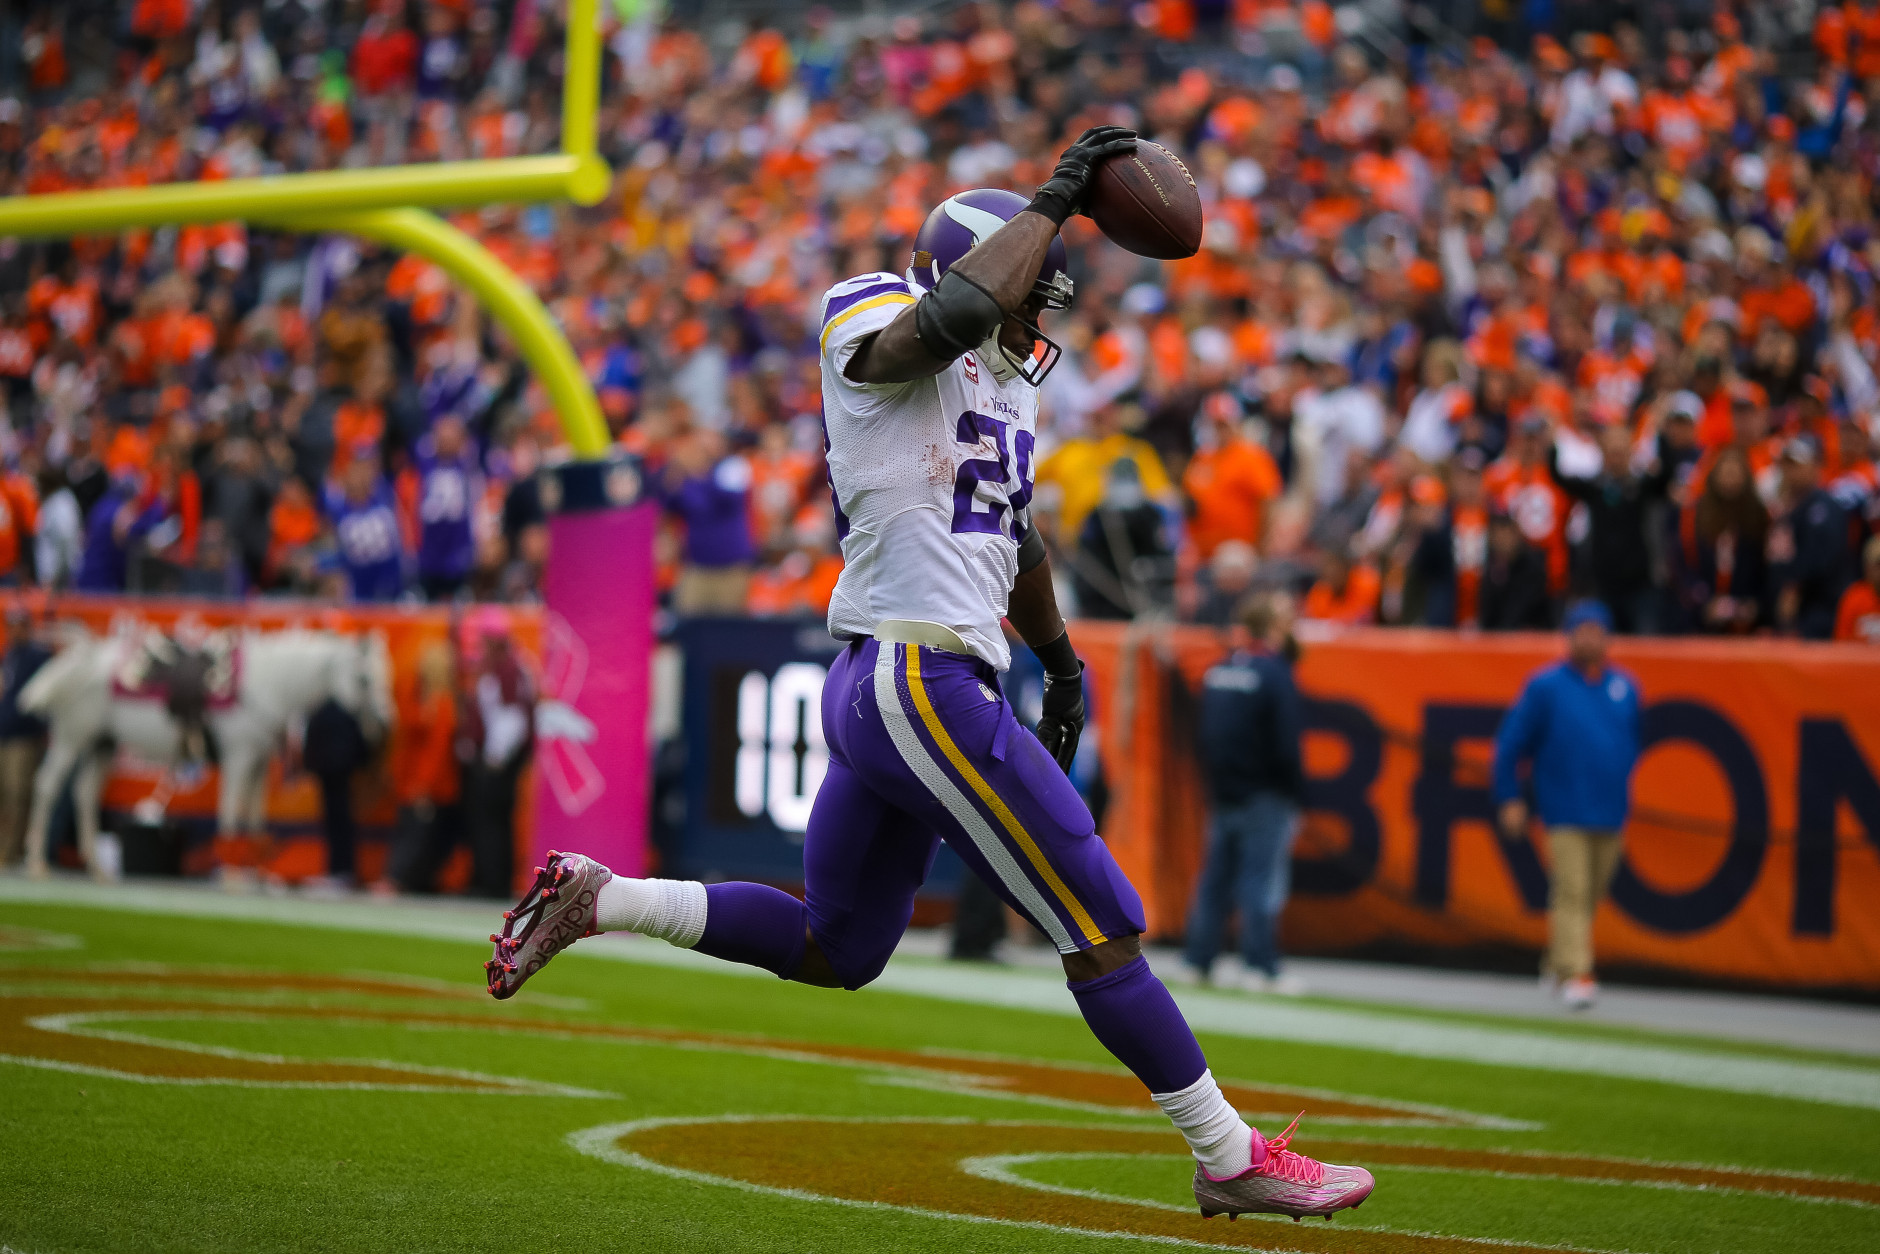 DENVER, CO - OCTOBER 4:  Running back Adrian Peterson #28 of the Minnesota Vikings celebrates after rushing for a 48 yard touchdown against the Denver Broncos in the fourth quarter of a game at Sports Authority Field at Mile High on October 4, 2015 in Denver, Colorado.  (Photo by Justin Edmonds/Getty Images)